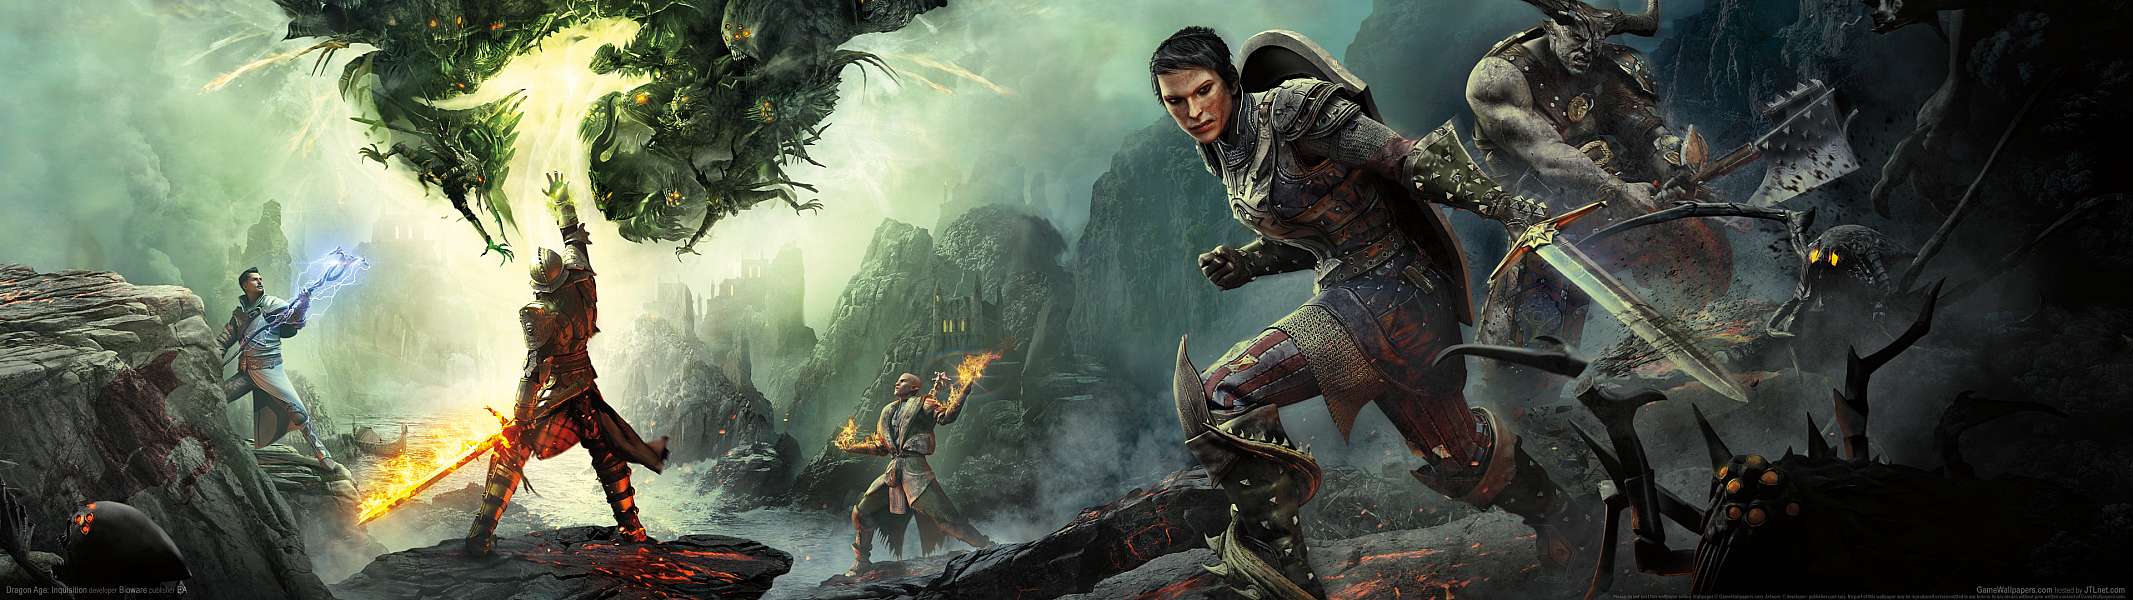 Dragon Age: Inquisition dual screen achtergrond